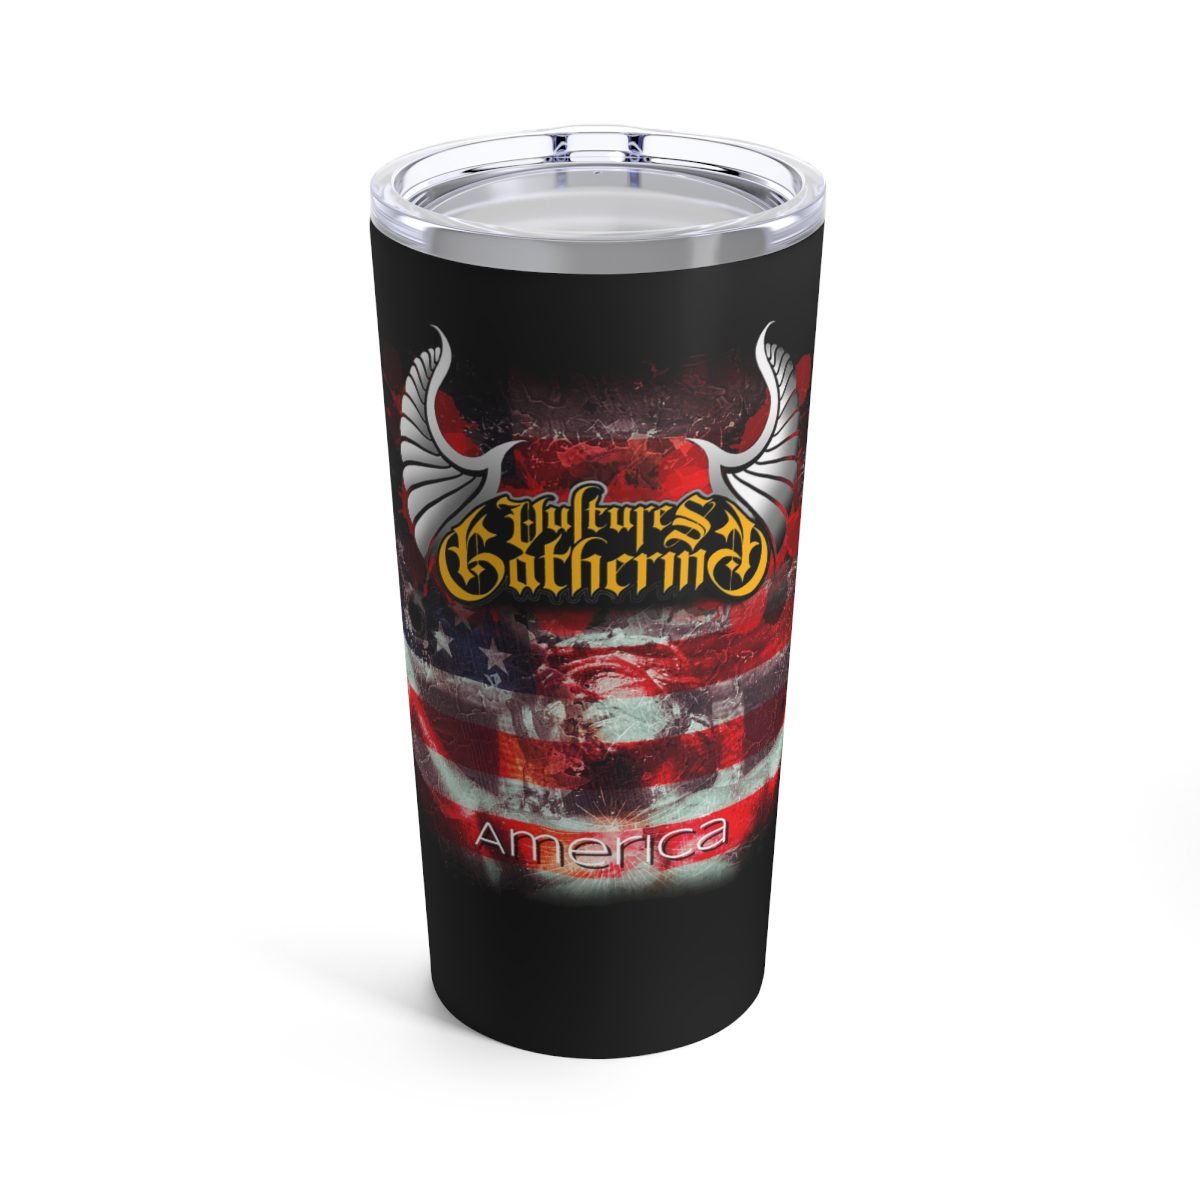 Vultures Gathering – America 20oz Stainless Steel Tumbler